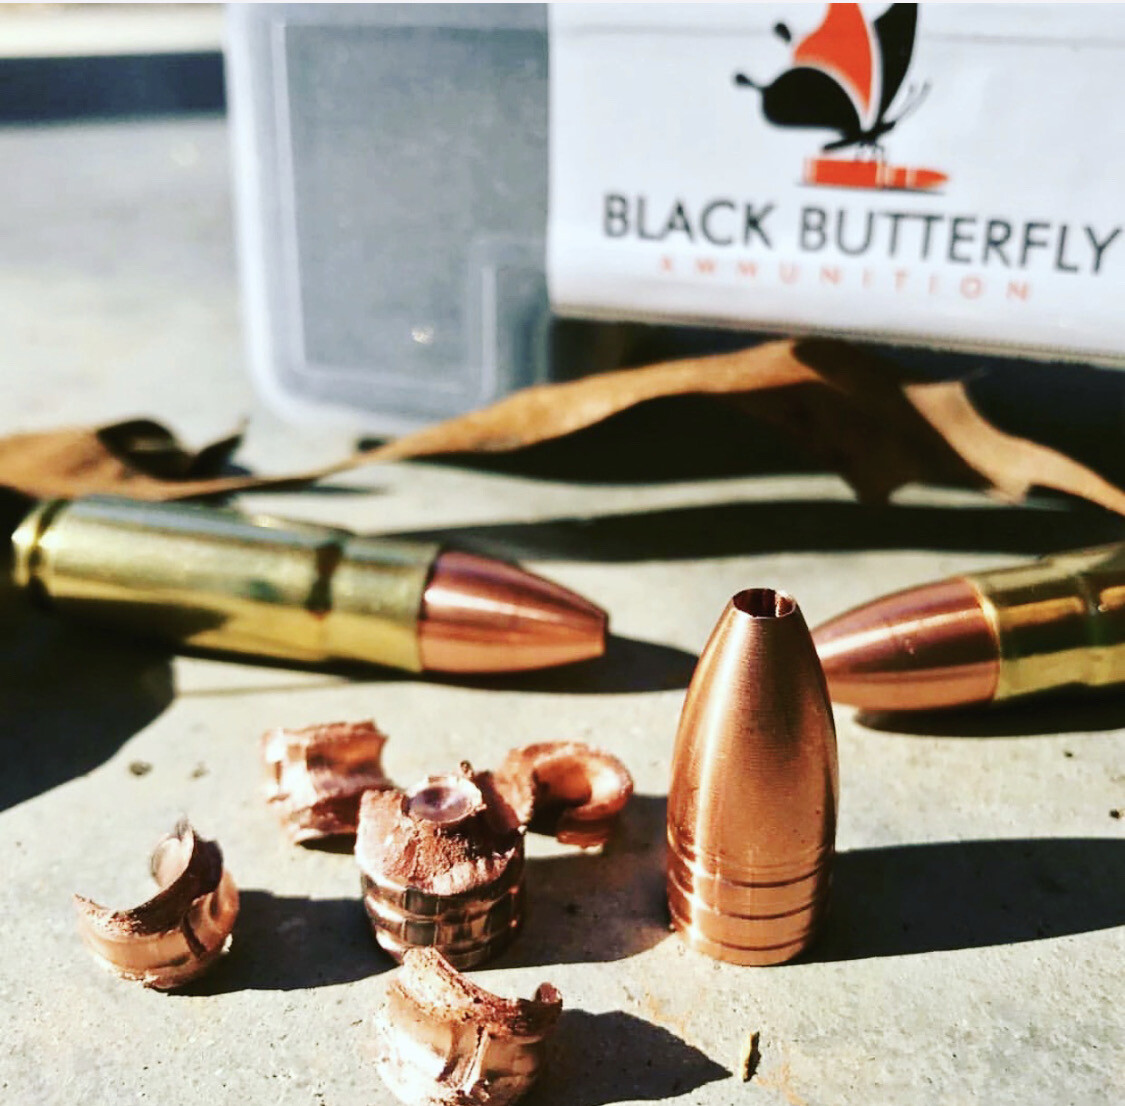 Black Butterfly Ammunition Premium, .458 SOCOM, 260 gr, 20 Rounds, Cutting Edge MAXIMUS FRACTURA High Velocity Fracturing